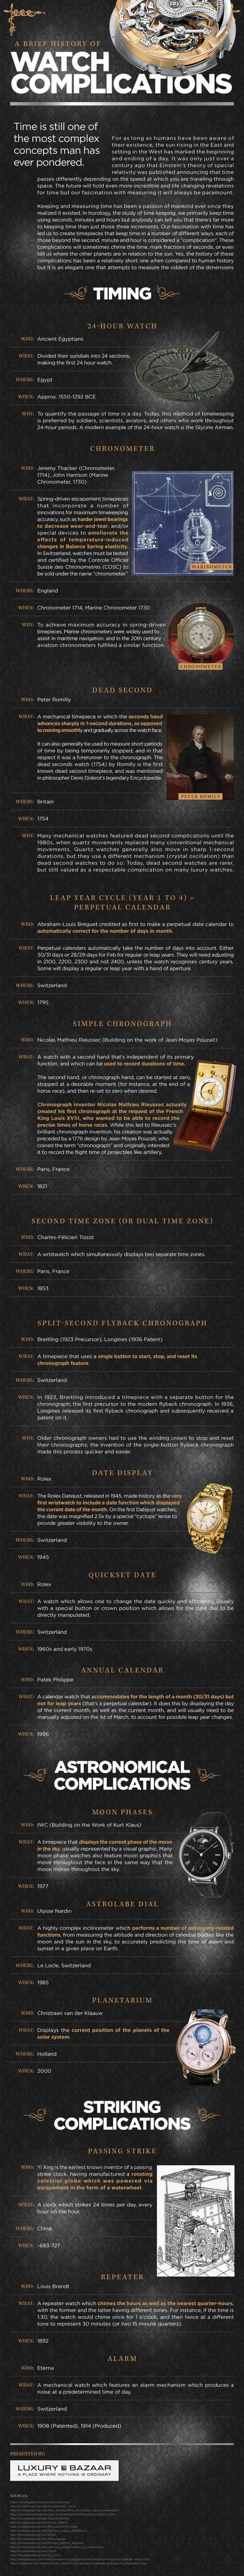 A Brief History of Watch Complications Infographic